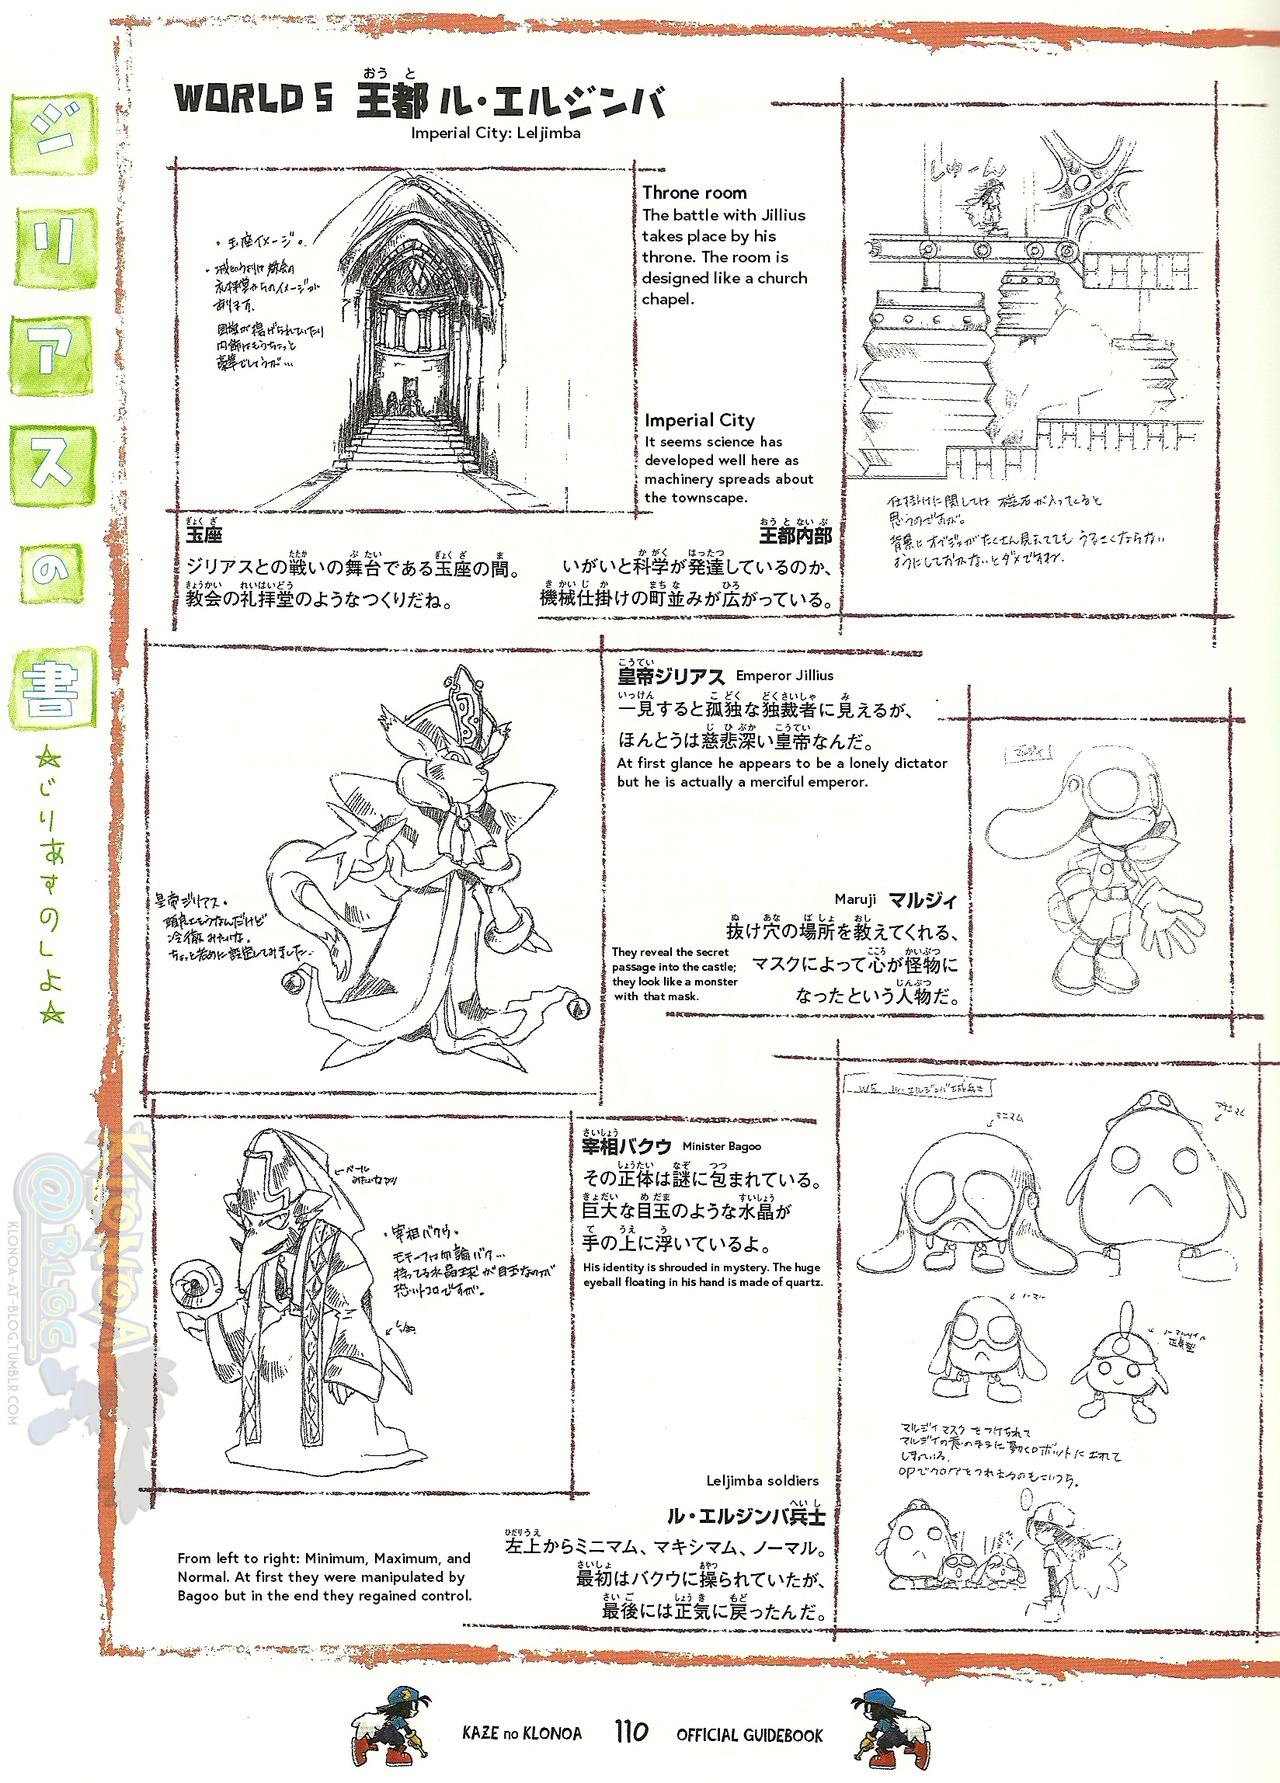 Klonoa @ Blog — Translated concept art pages from the Klonoa: